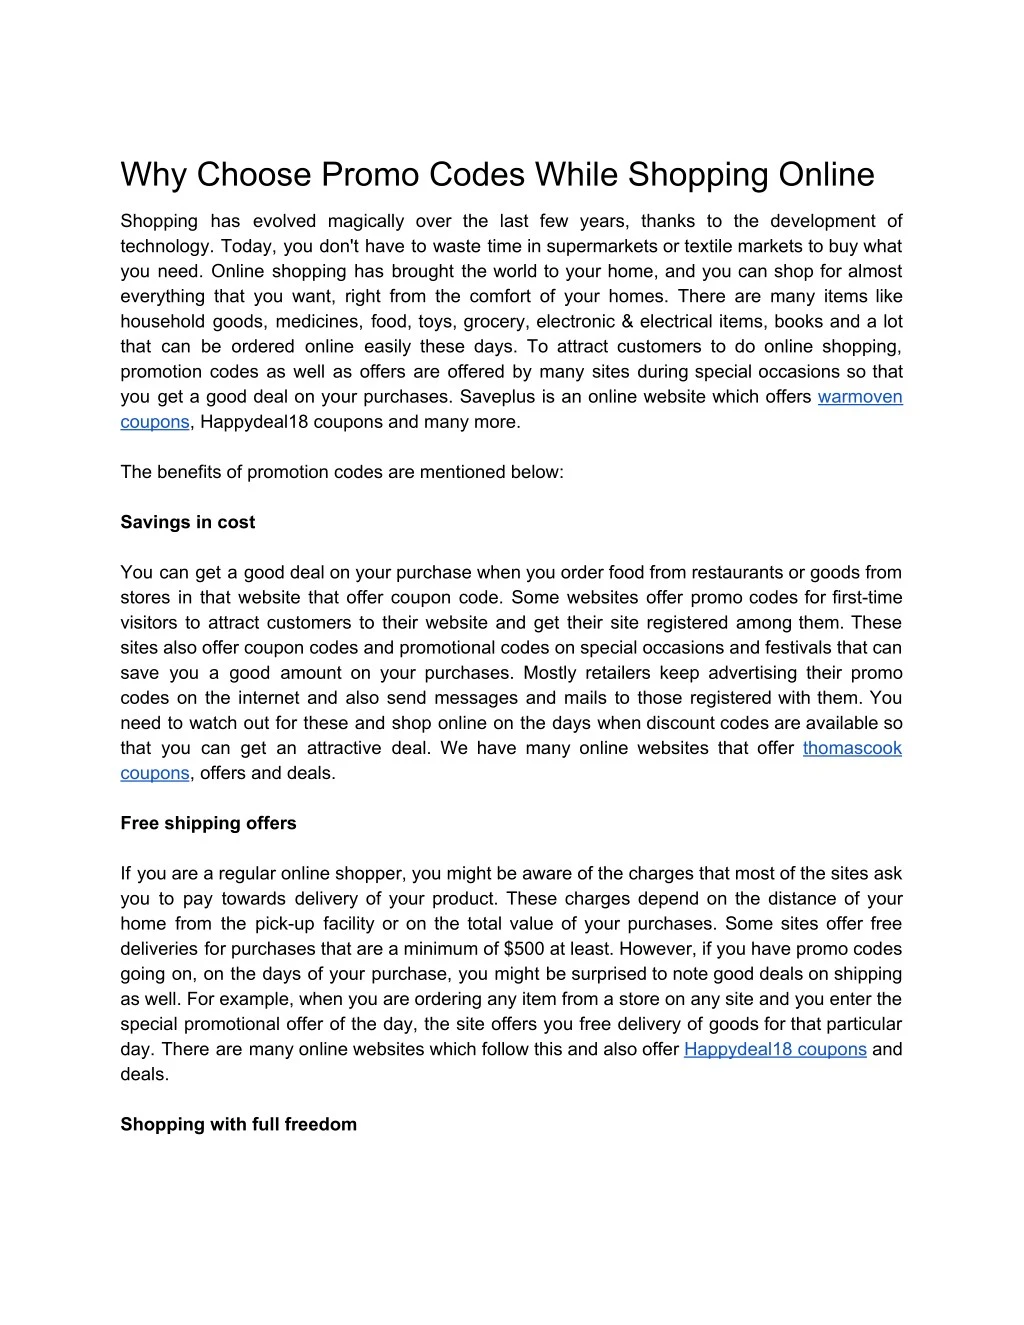 why choose promo codes while shopping online